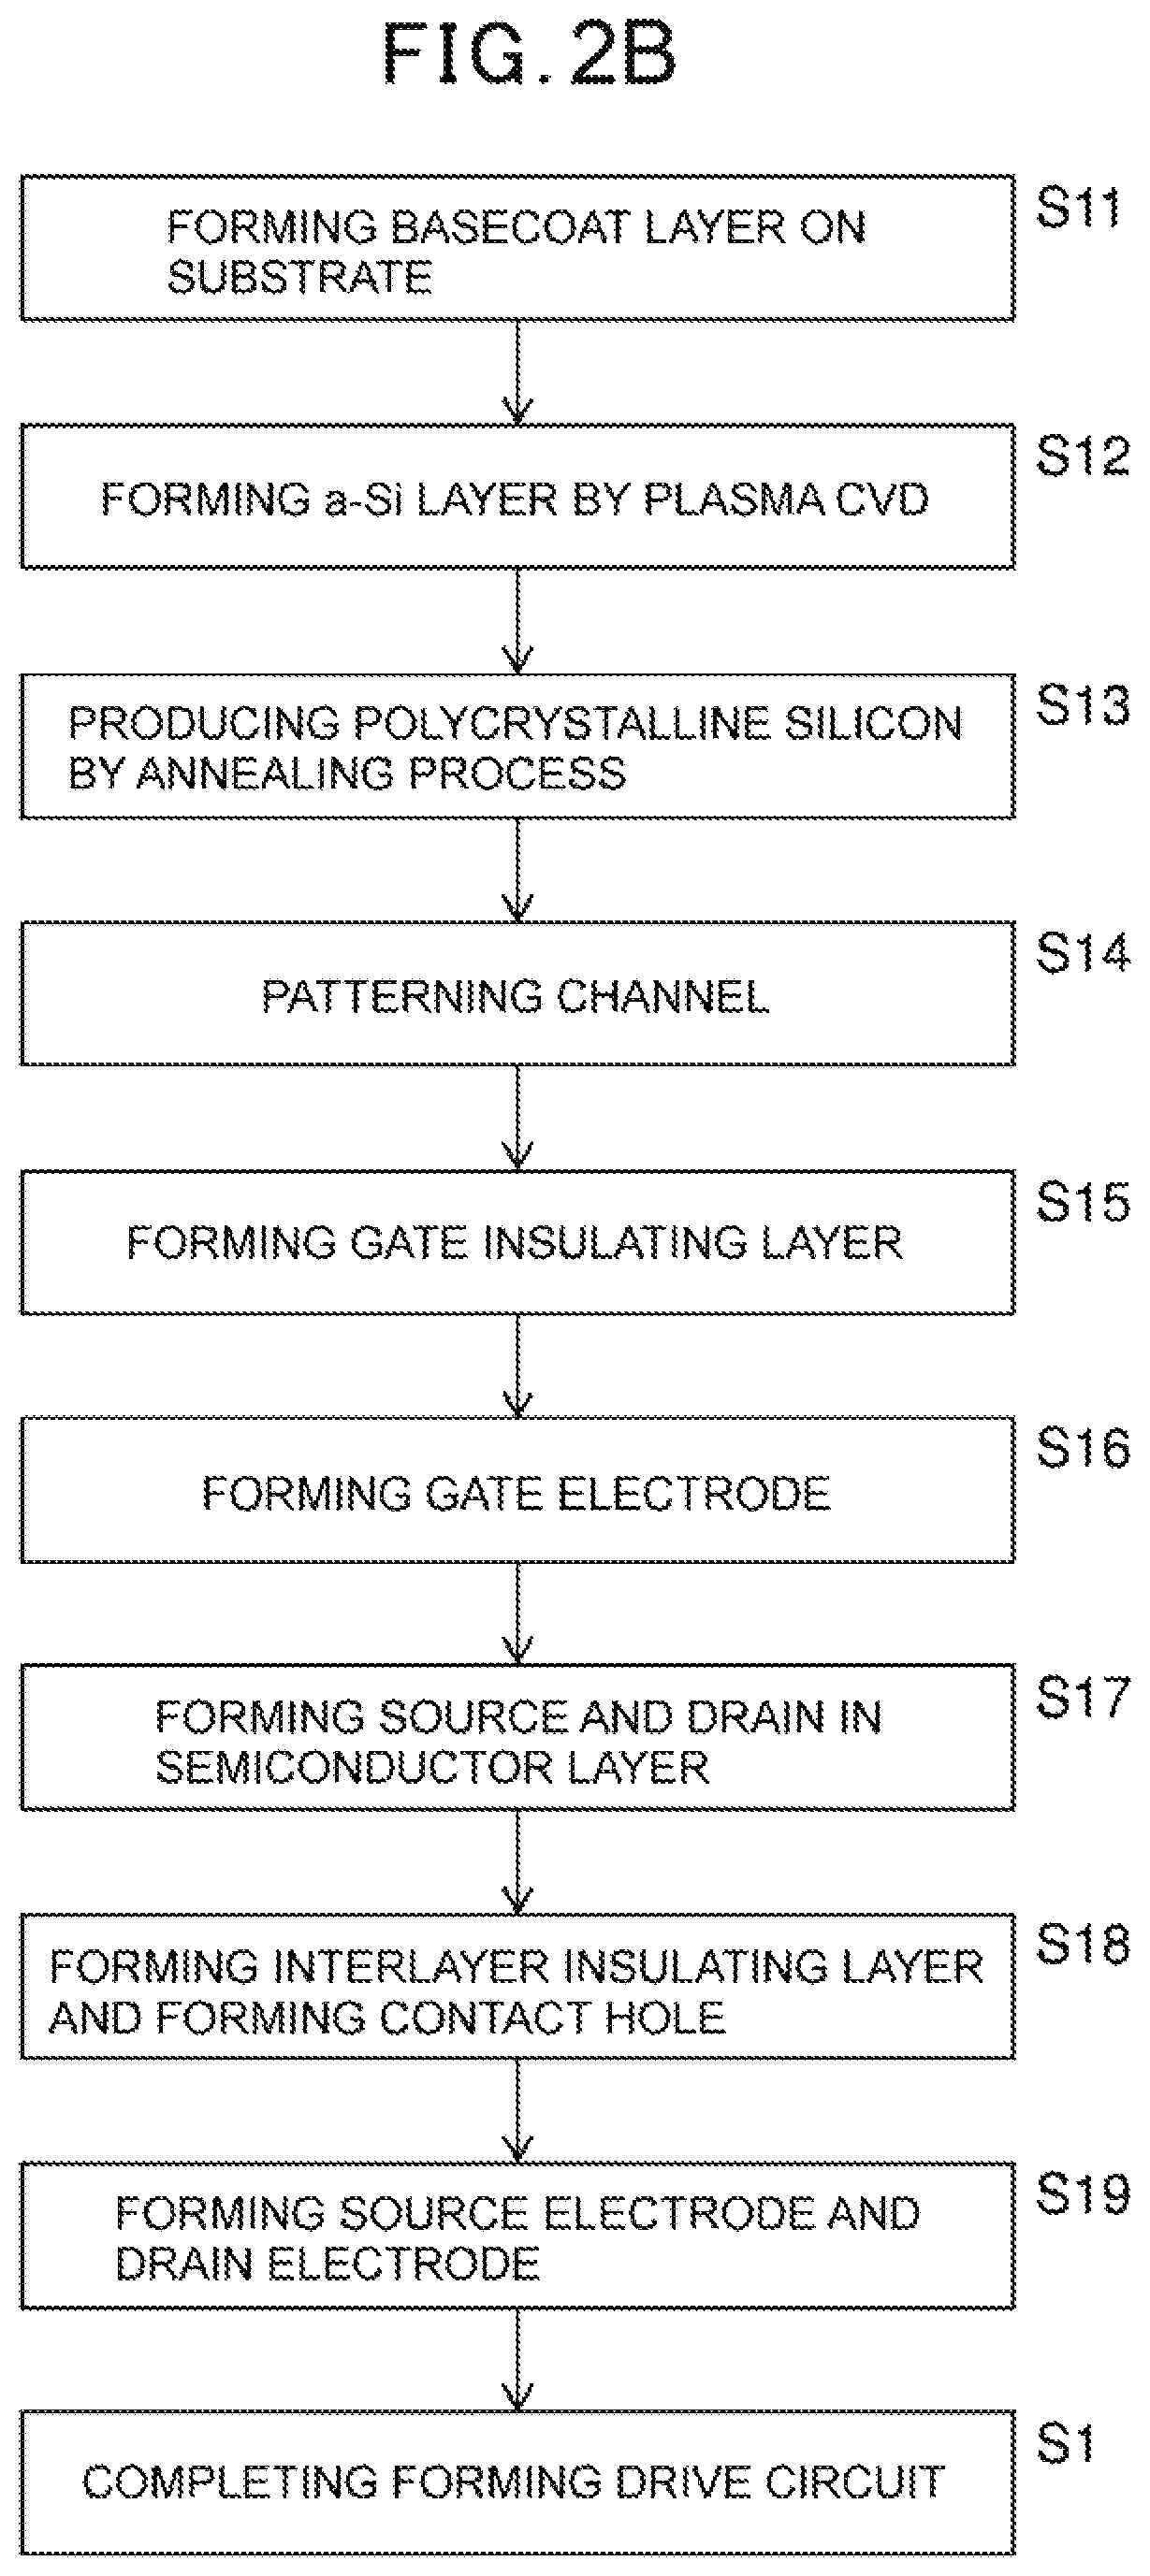 Organic EL display apparatus and manufacturing method therefor